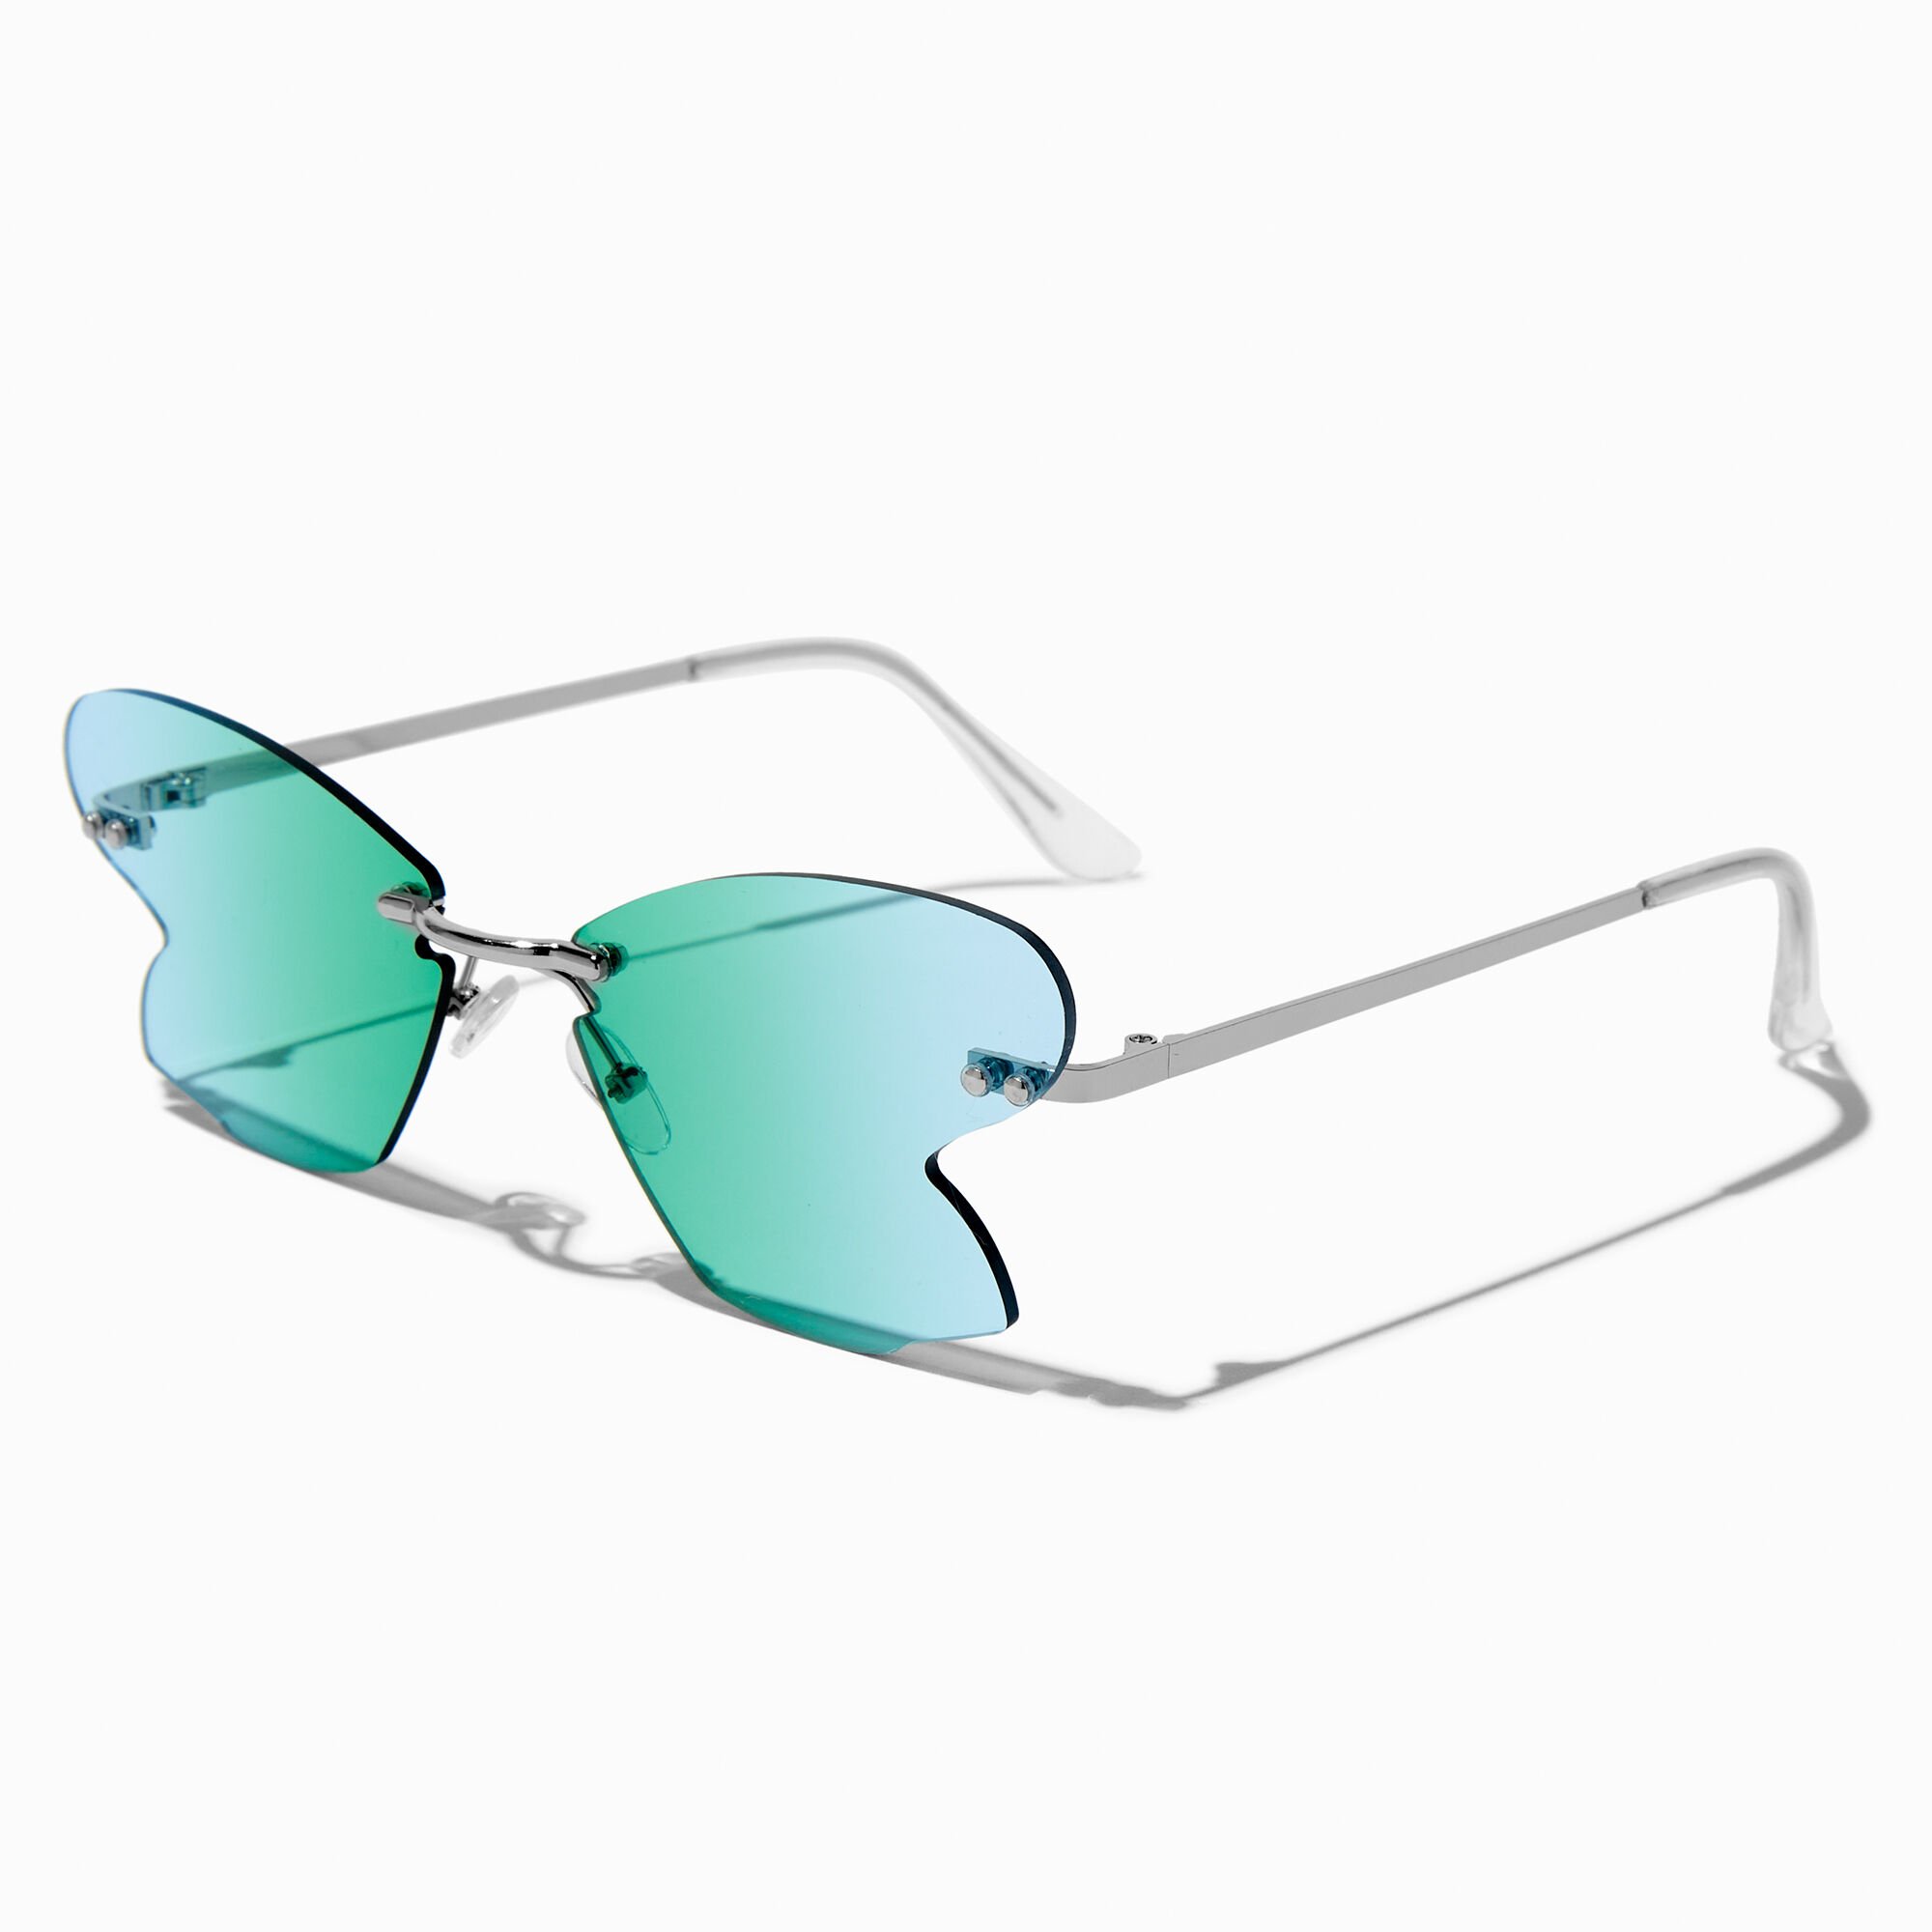 View Claires BlueGreen Butterfly Wing Sunglasses information